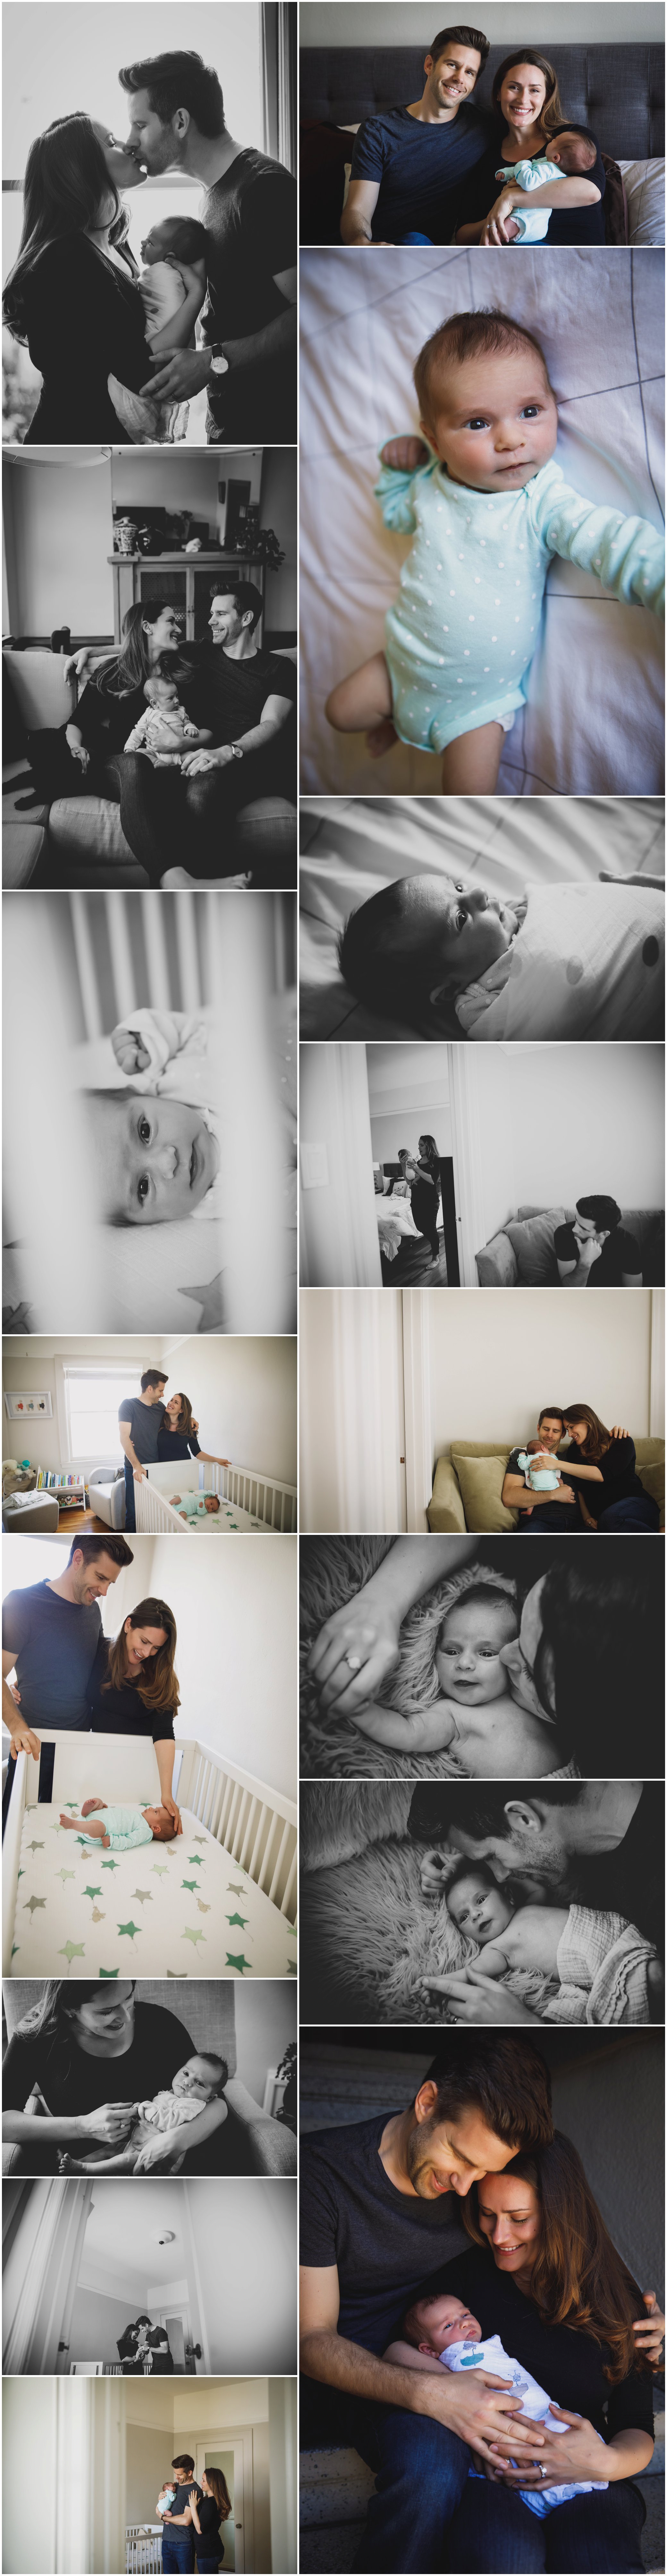 Baby P's In-Home Newborn Photography Session, by Katie Rain